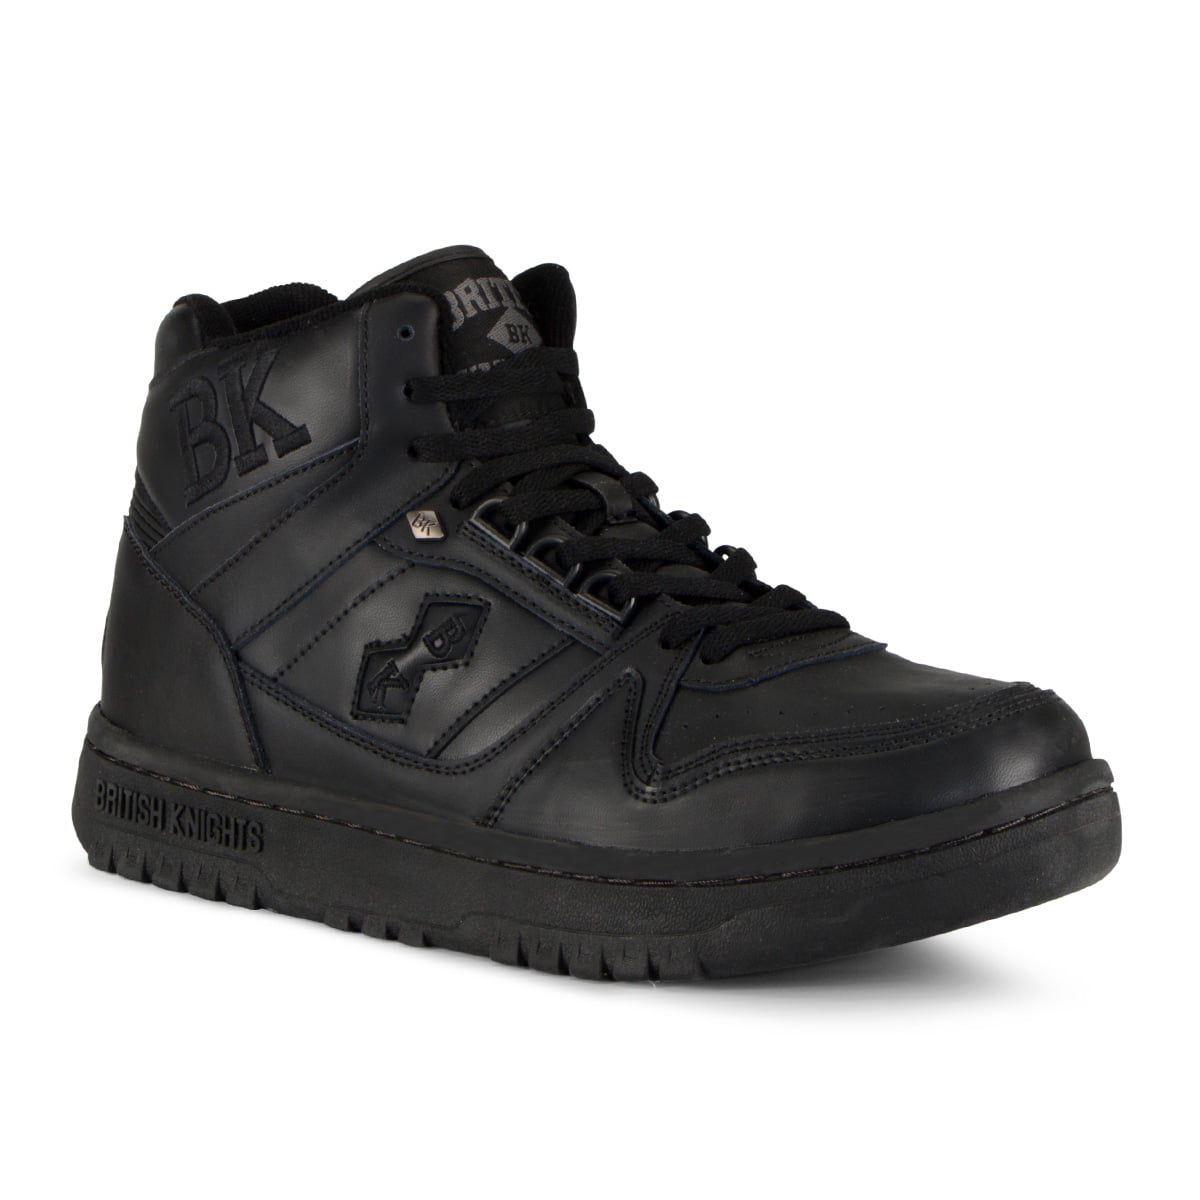 British Knights - British Knights Men's Kings Leather High Top Sneaker ...